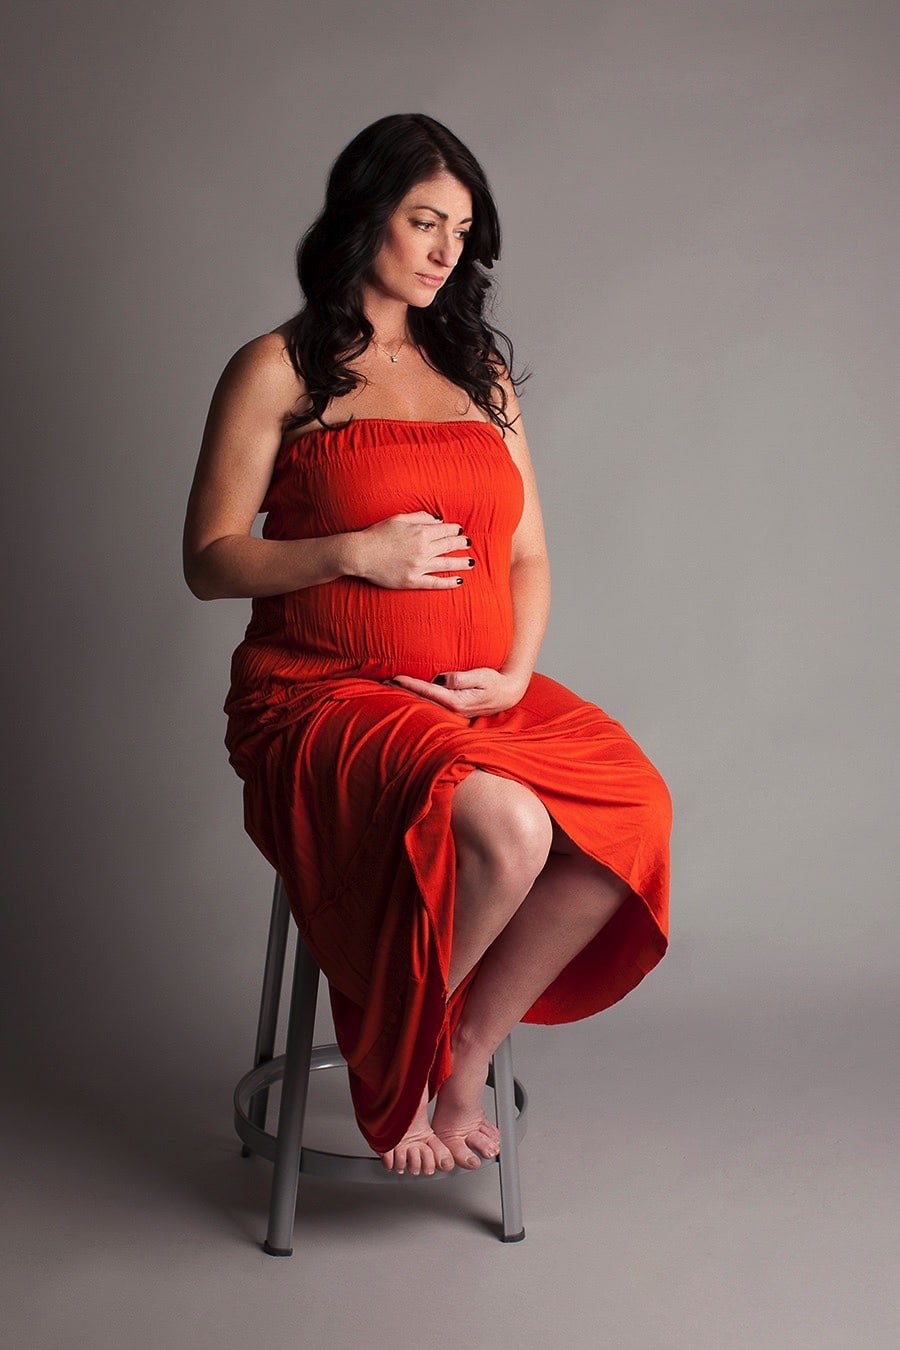 Comfortable And Casual Maternity Photos Miette Photography